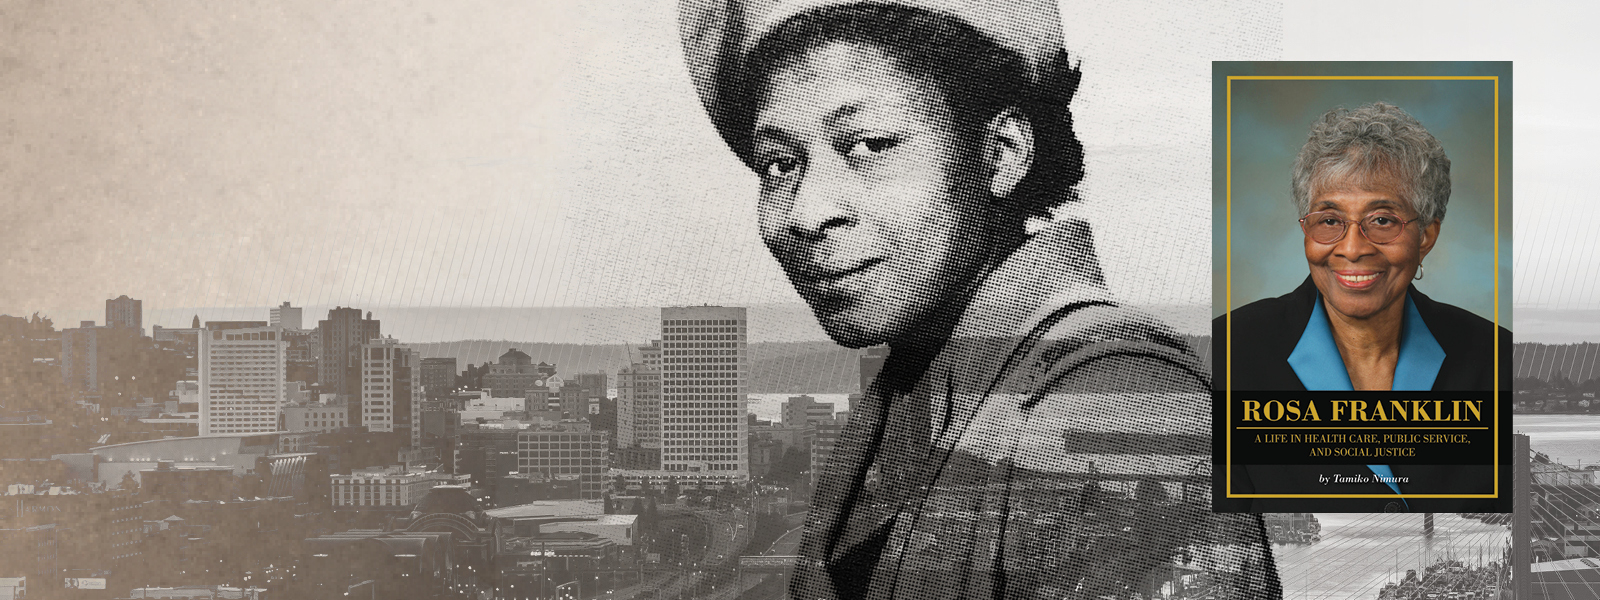 Rosa Franklin with Tacoma skyline in background and front cover of oral history book